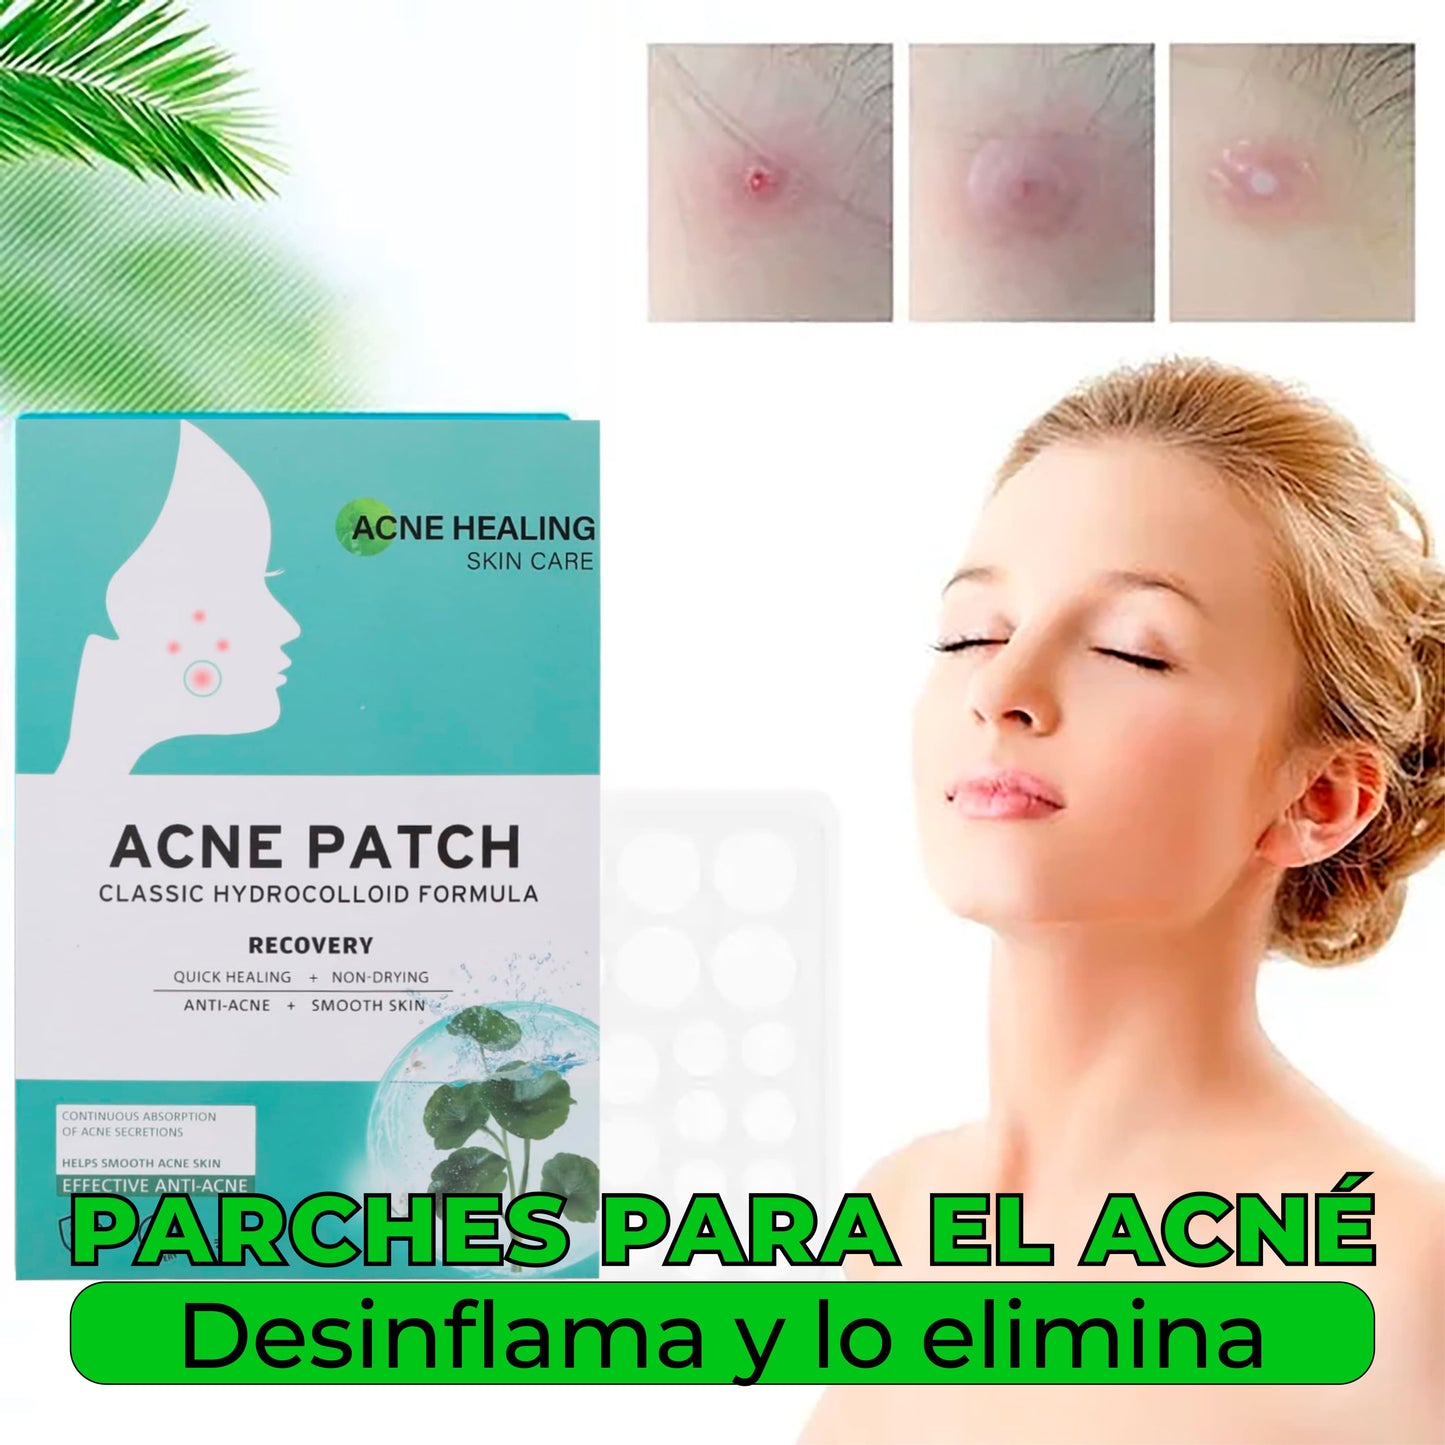 ACNE PATCH